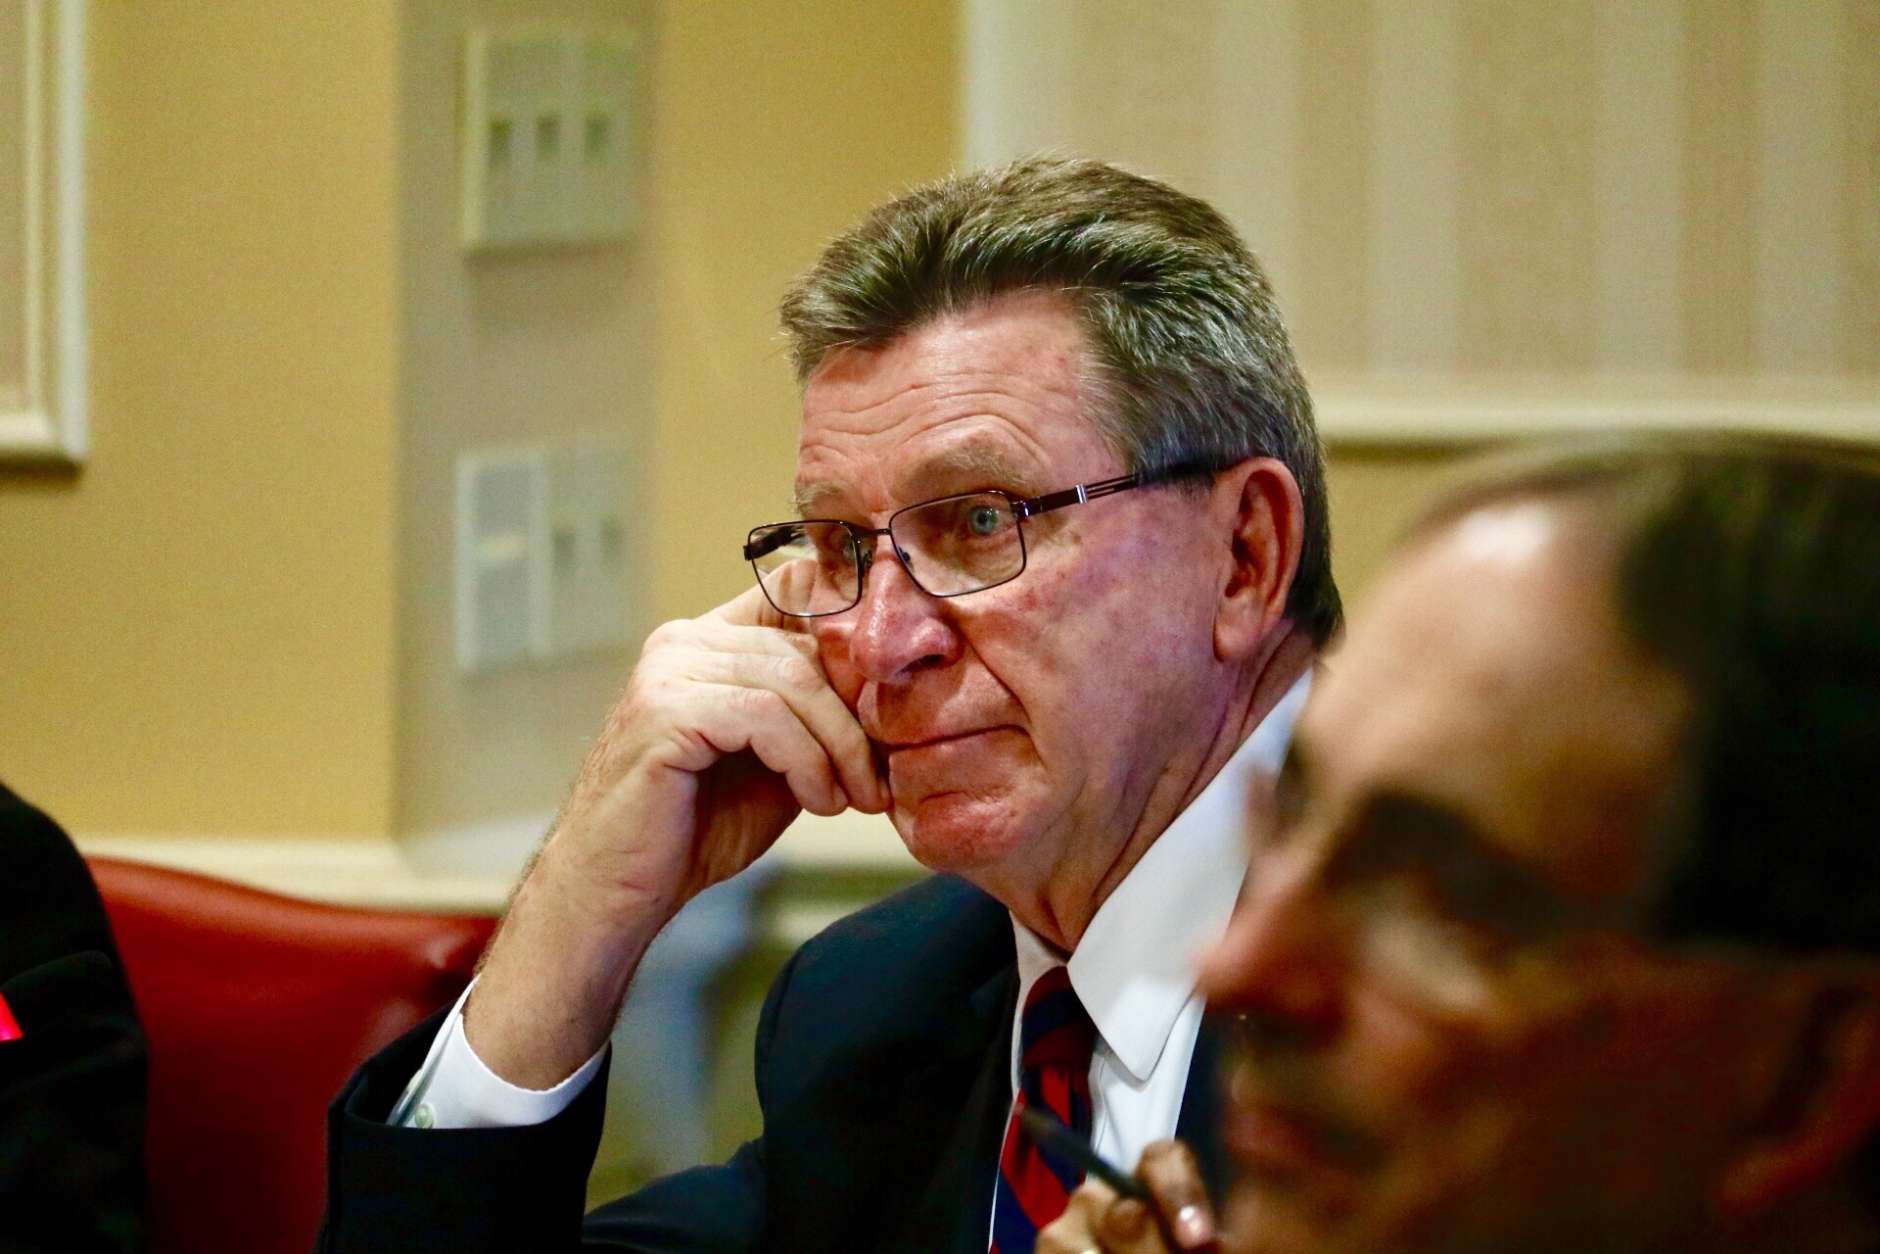 Sen. Thomas M. Middleton at the Monday hearing for Hogan's choice to lead the state's health department. (WTOP/Kate Ryan)